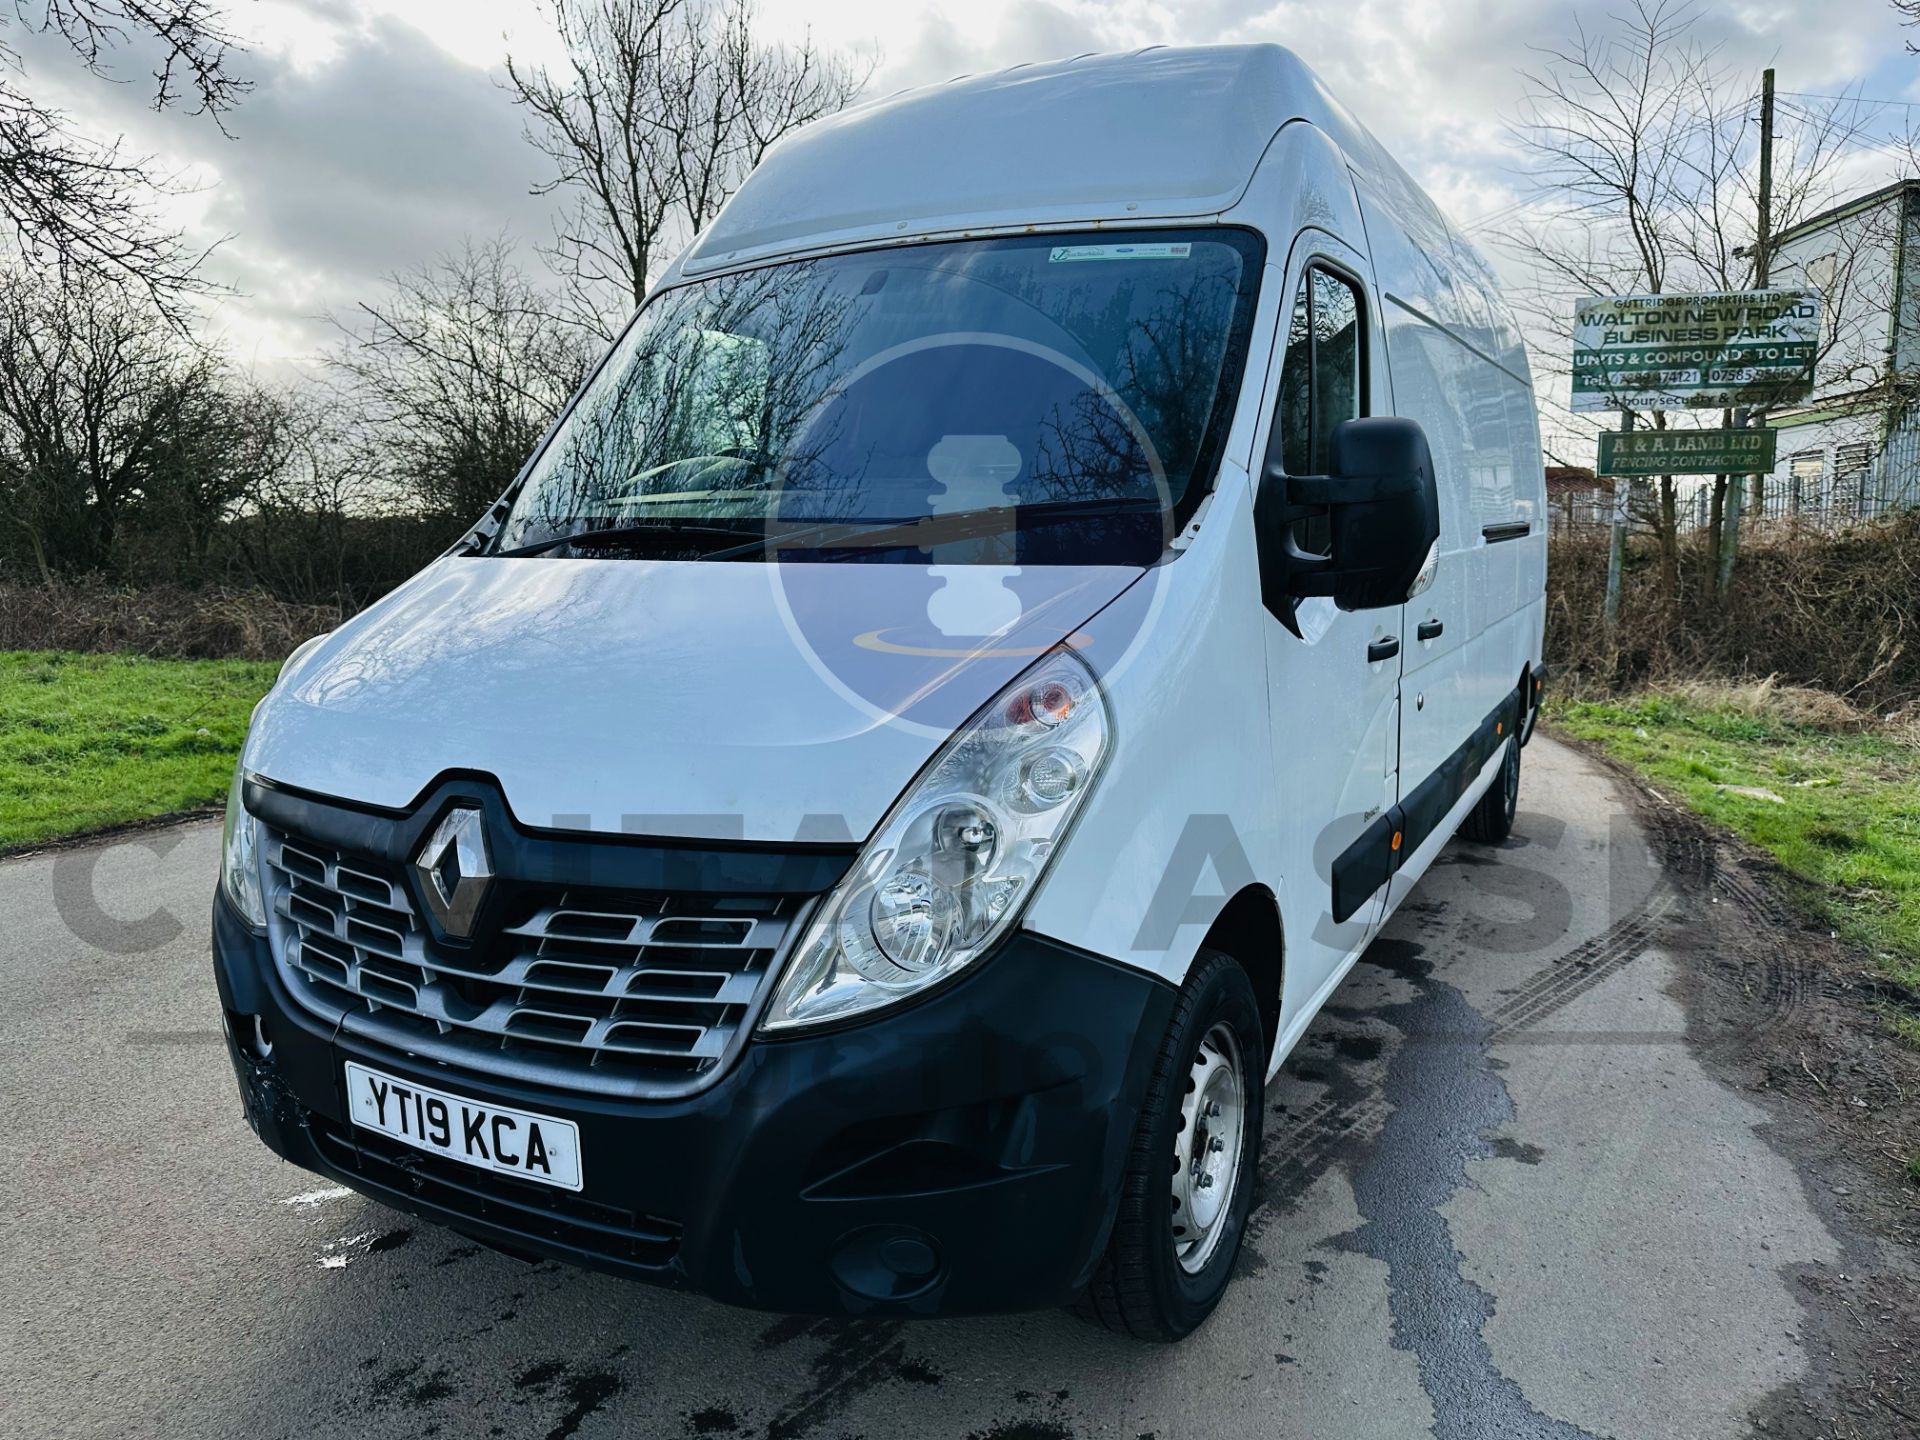 (On Sale) RENAULT MASTER *BUSINESS ENERGY* LWB EXTRA HI-ROOF (2019 - EURO 6) 2.3 DCI - 145 BHP - Image 3 of 25